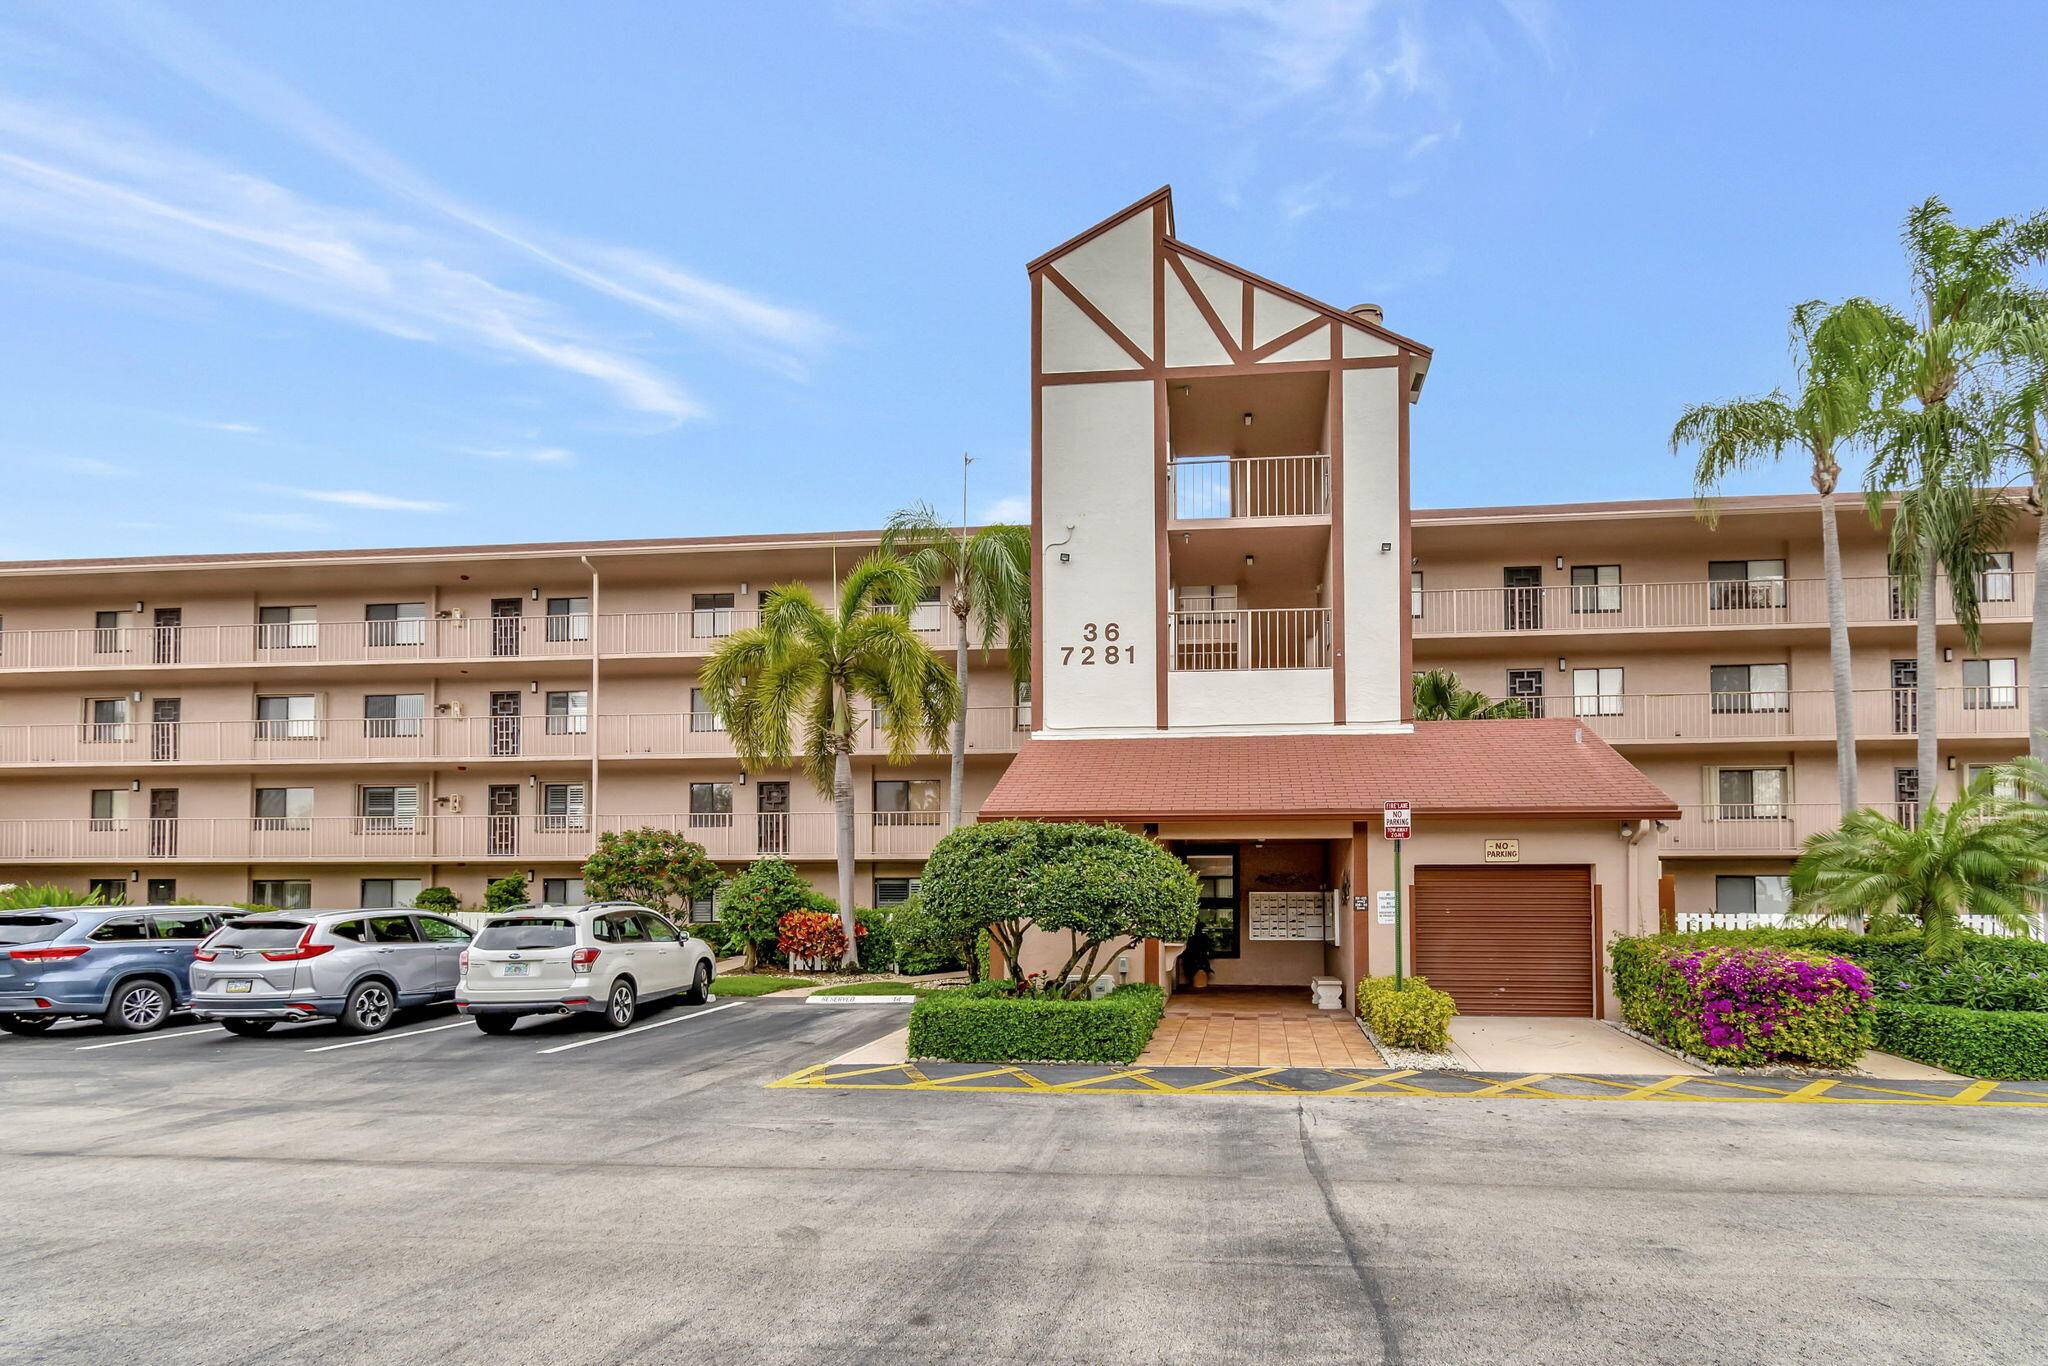 2 BR 2BA Condo located in the 24 Hour Manned Gated 55 community of Huntington Lakes in Delray Beach.